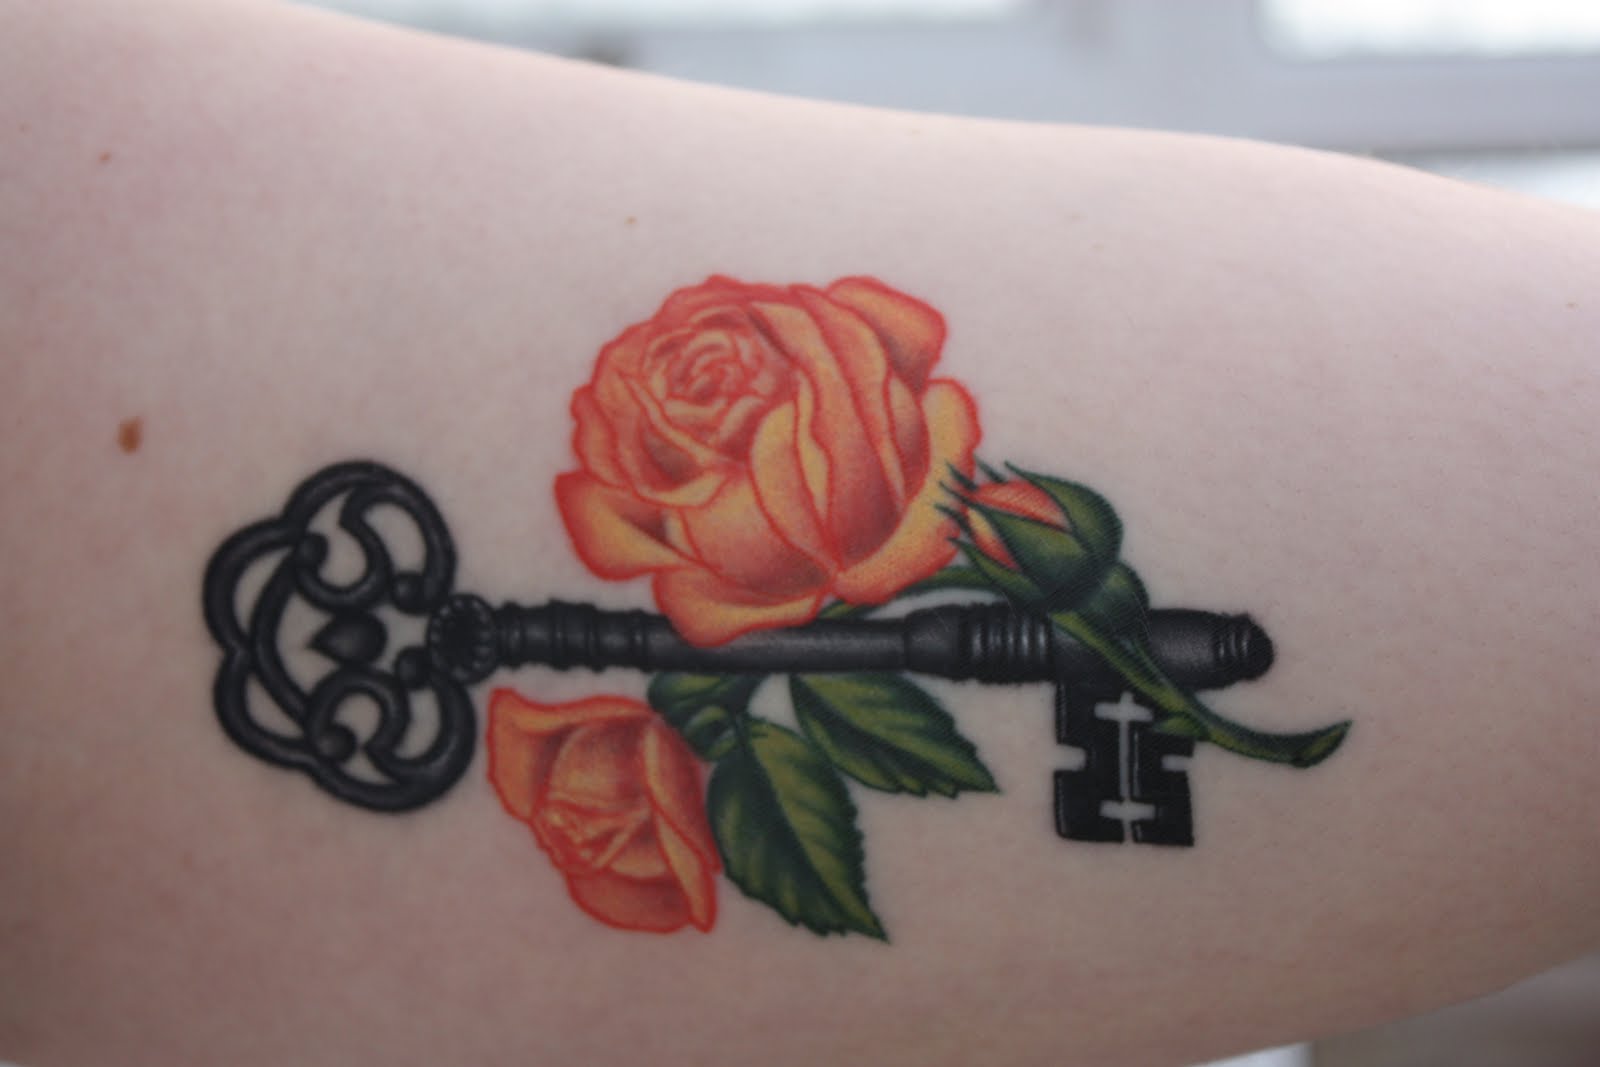 Orange Roses With Key Tattoo Design For Arm